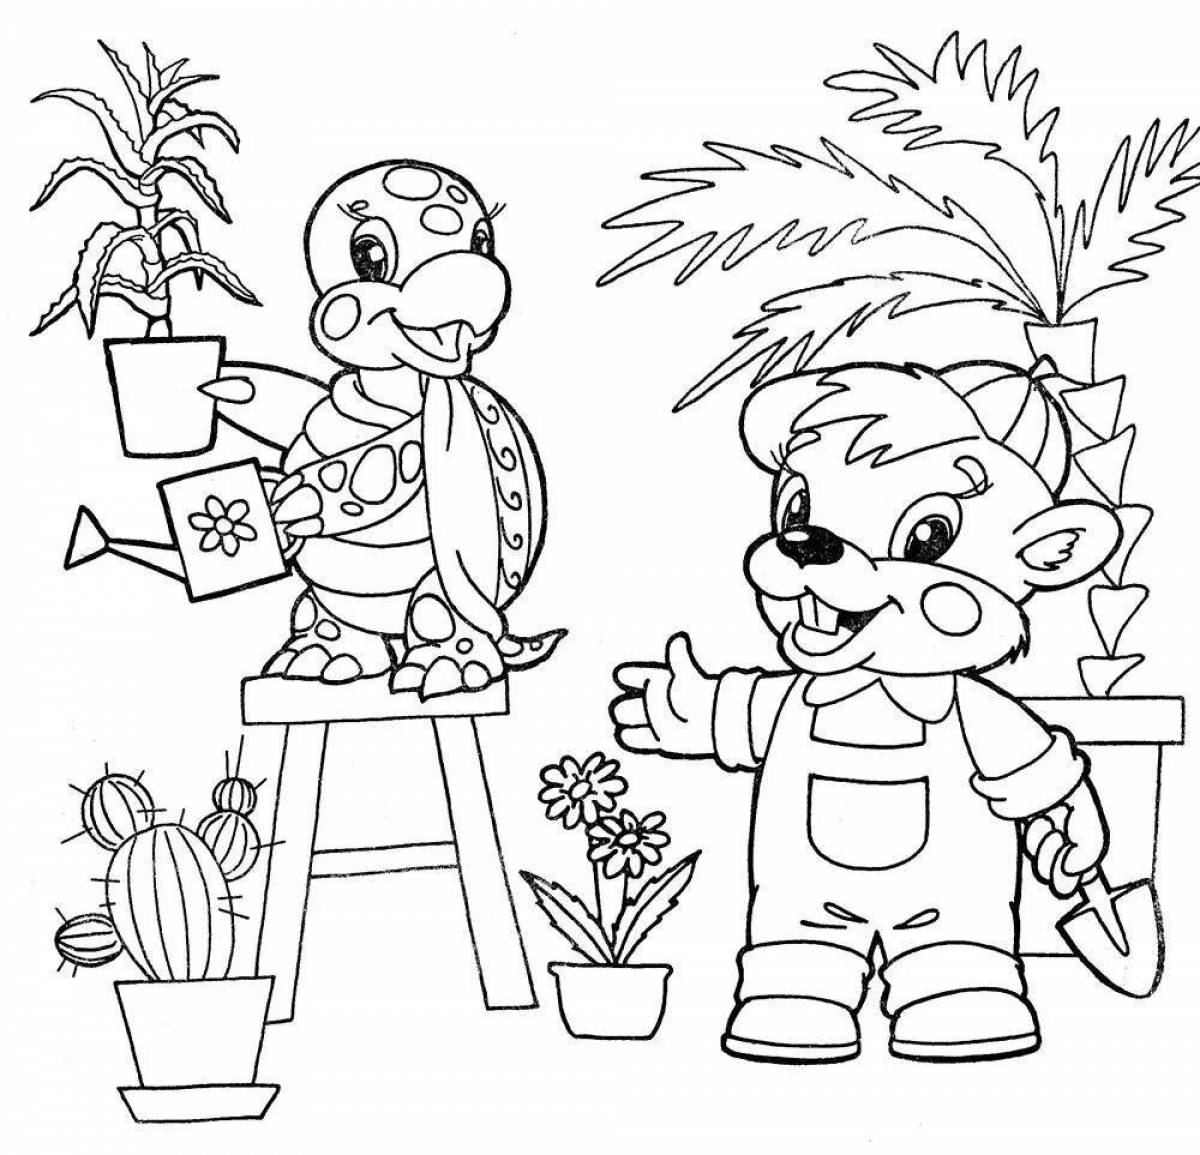 Houseplant care for kids #6